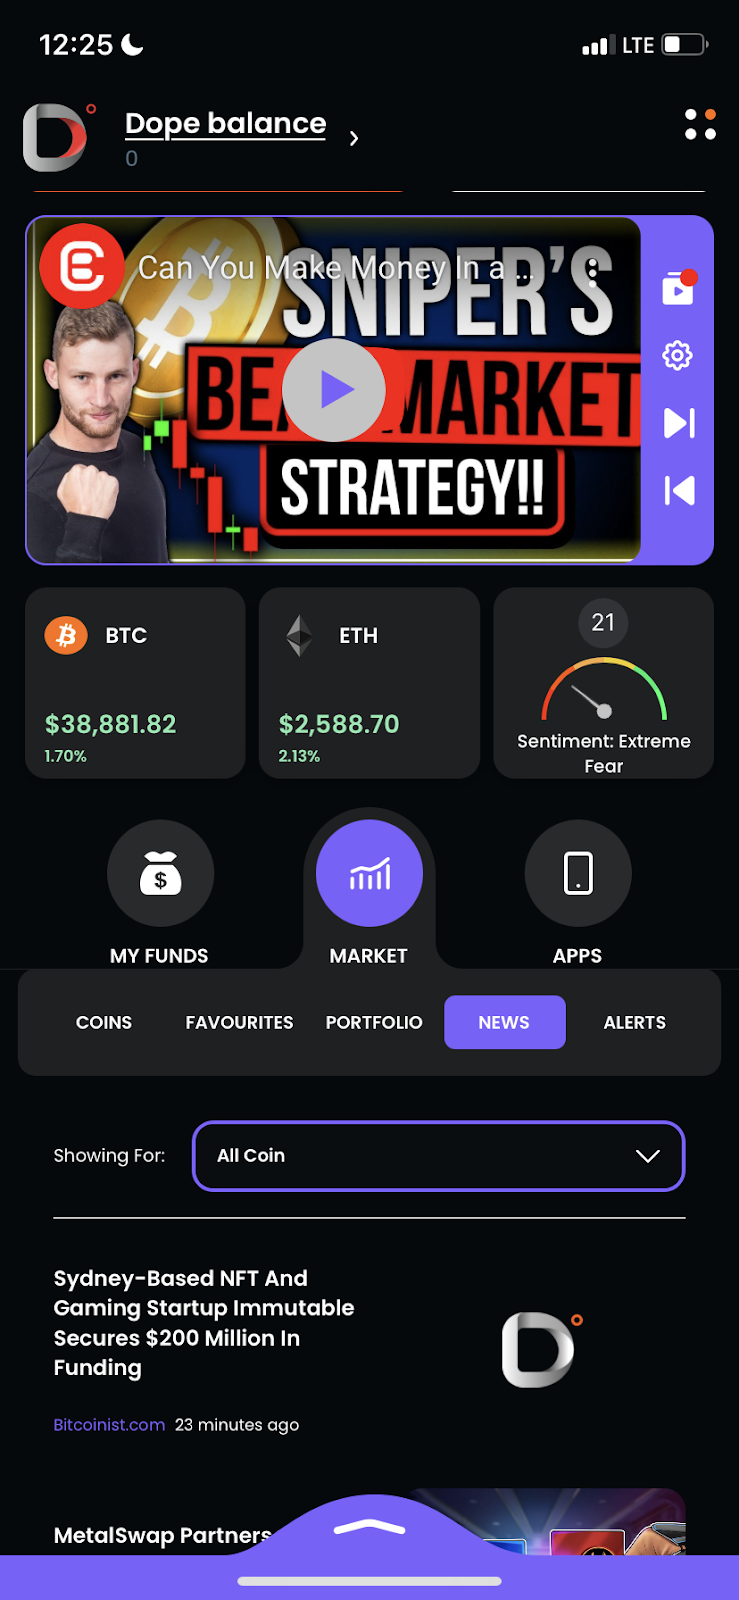 The main screen of Dopamine App contains everything you need to begin your crypto journey from wallets to influencers videos and market updates